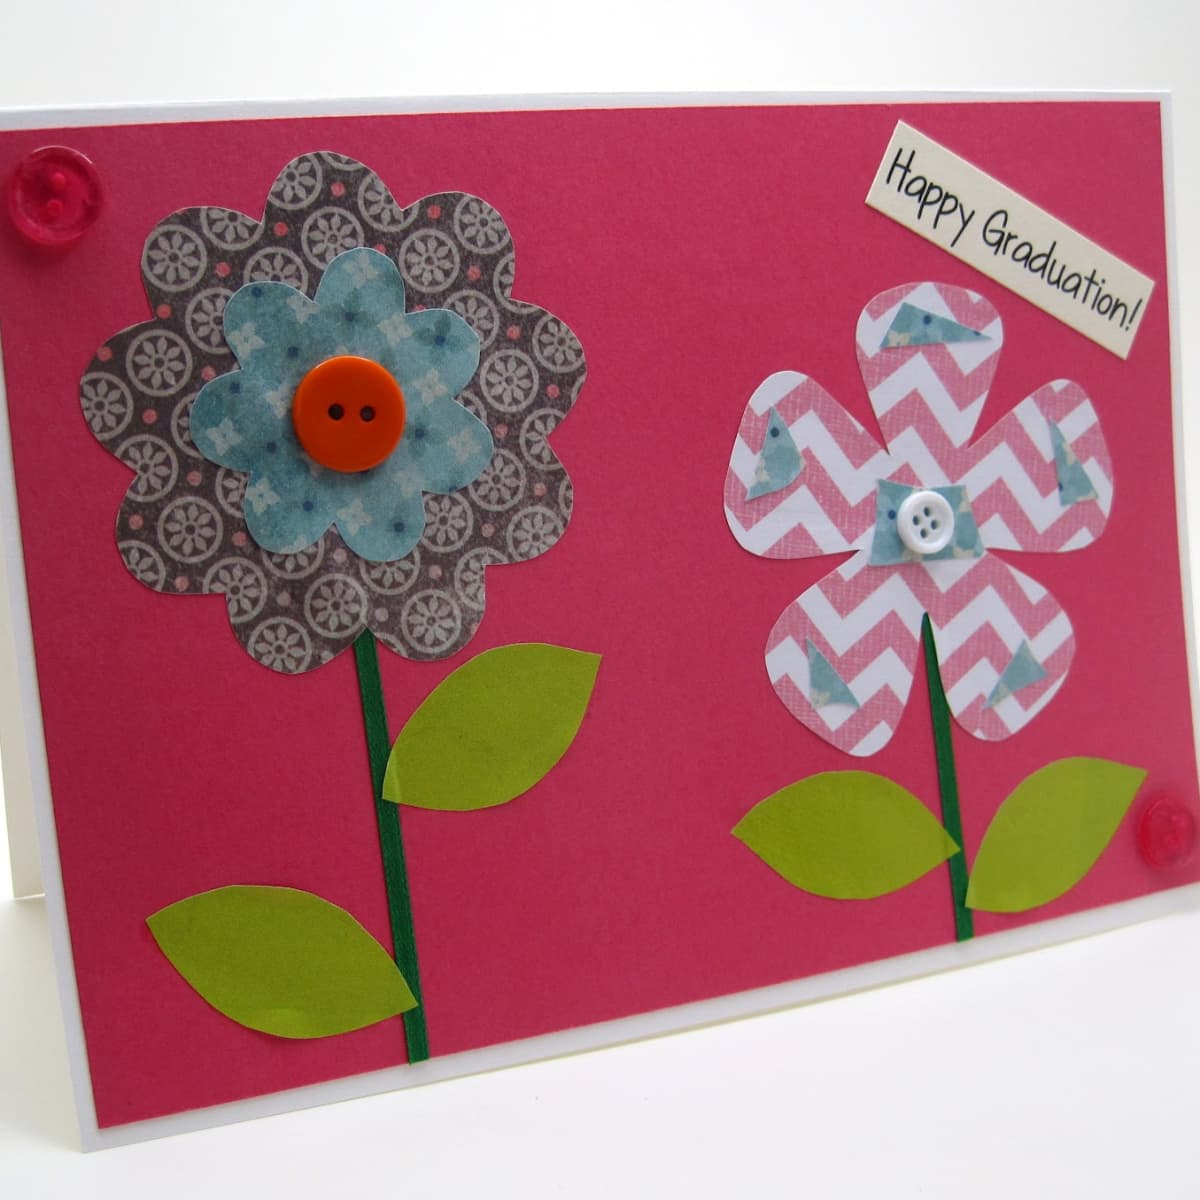 Recycled Magazine Craft Project: Greeting Cards - FeltMagnet